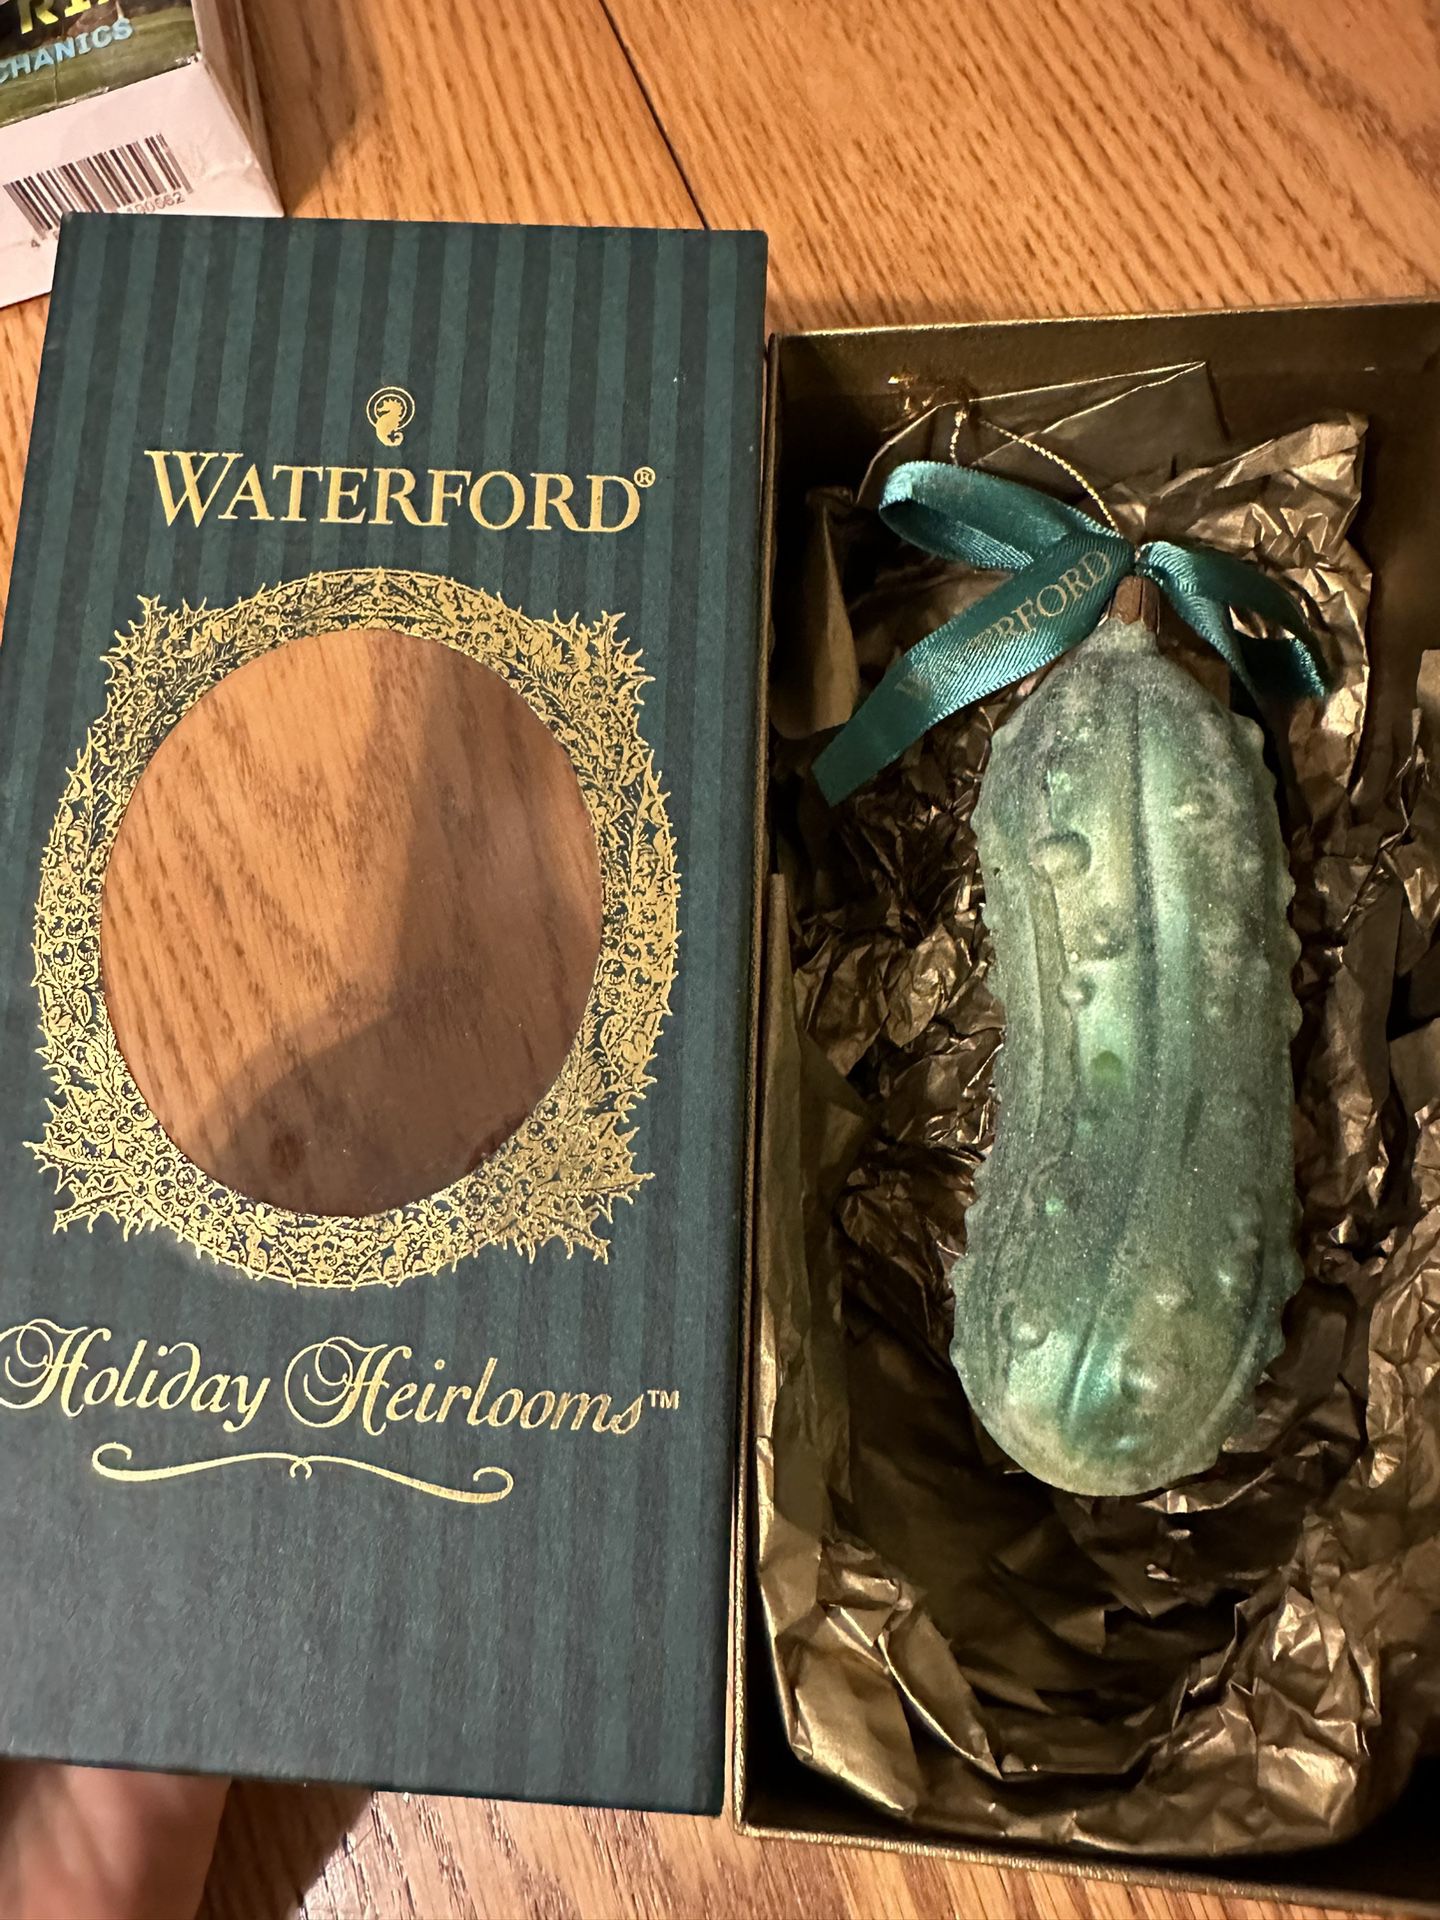 Waterford Holiday Heirloom Blown Glass Pickle Christmas Ornament Approx 5.5"